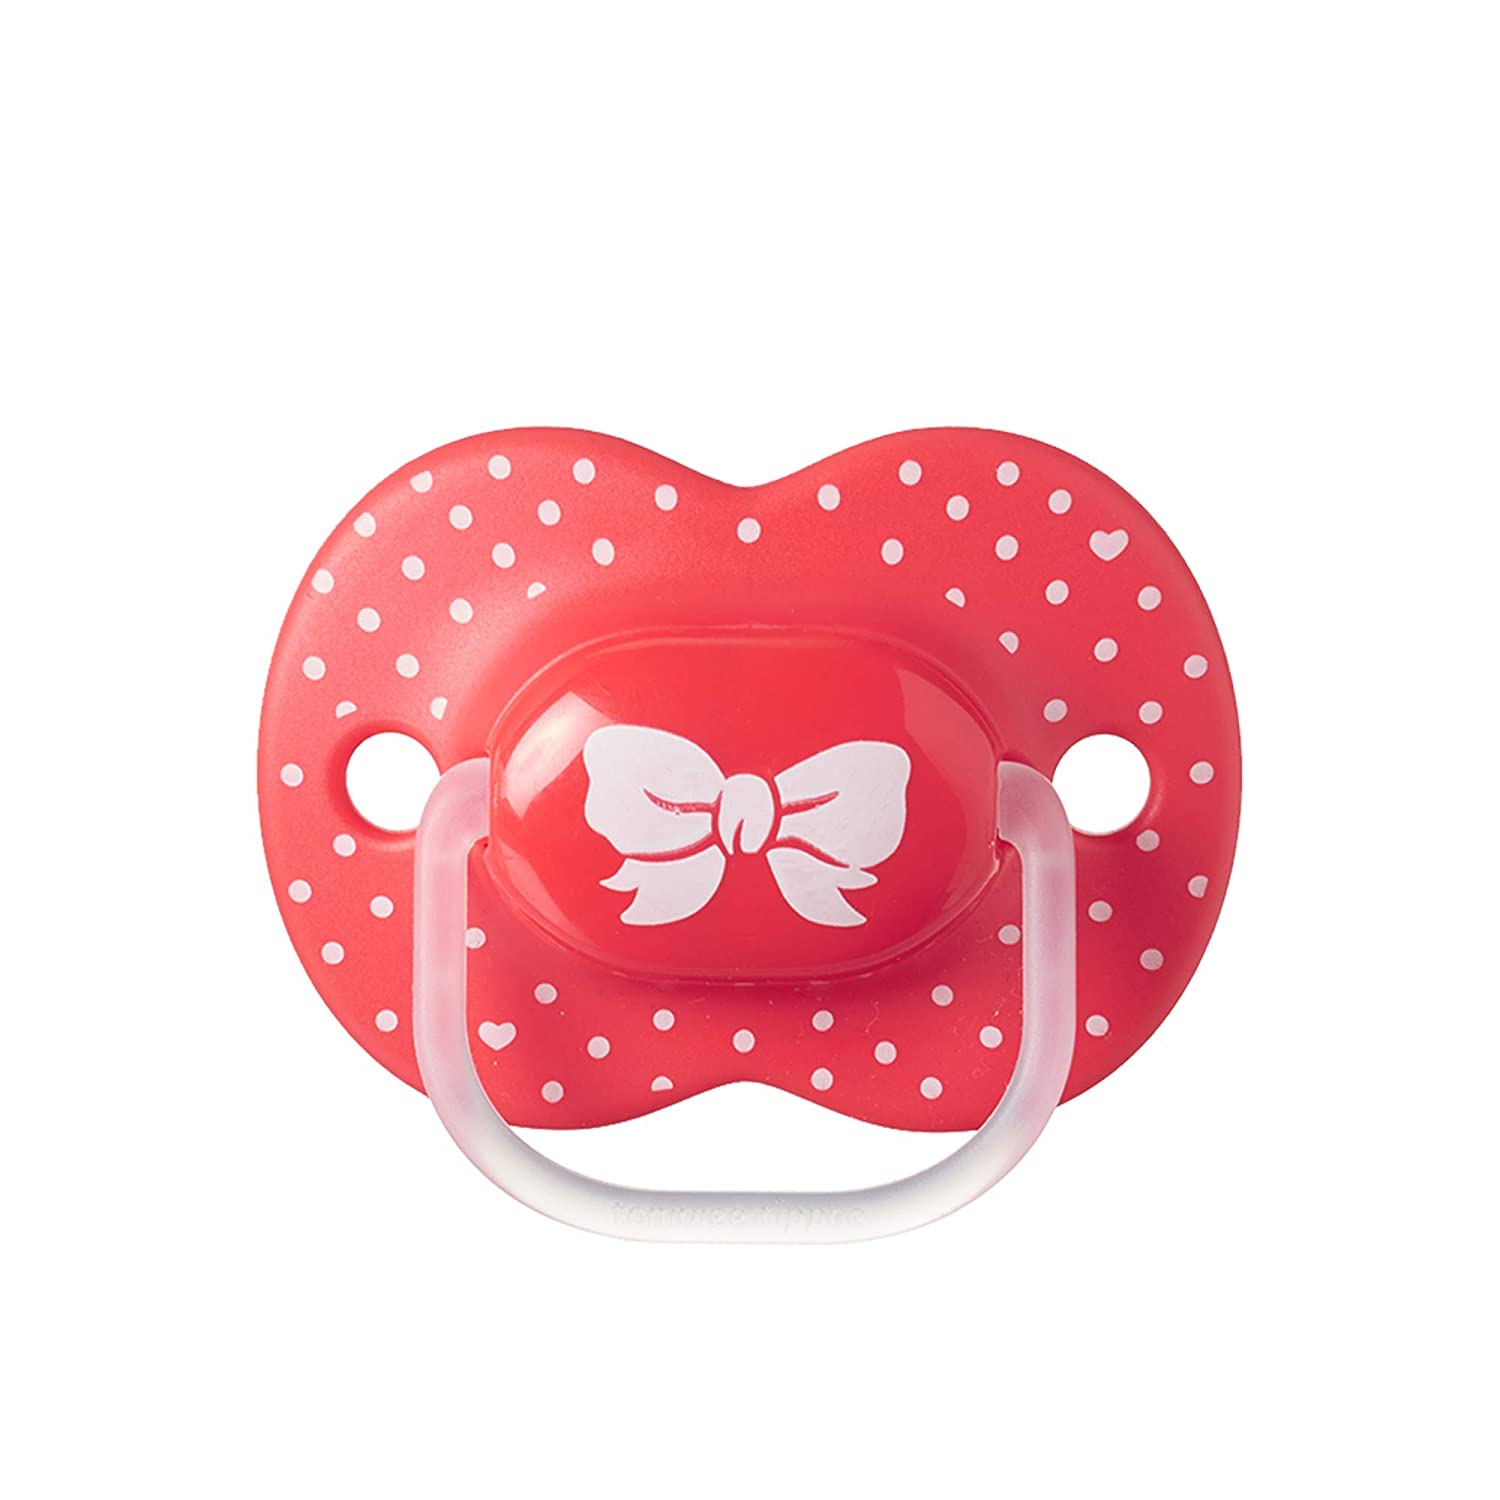 Tommee Tippe Little London Symetric Pacifier, 6-18 Months, BPA Free, Red